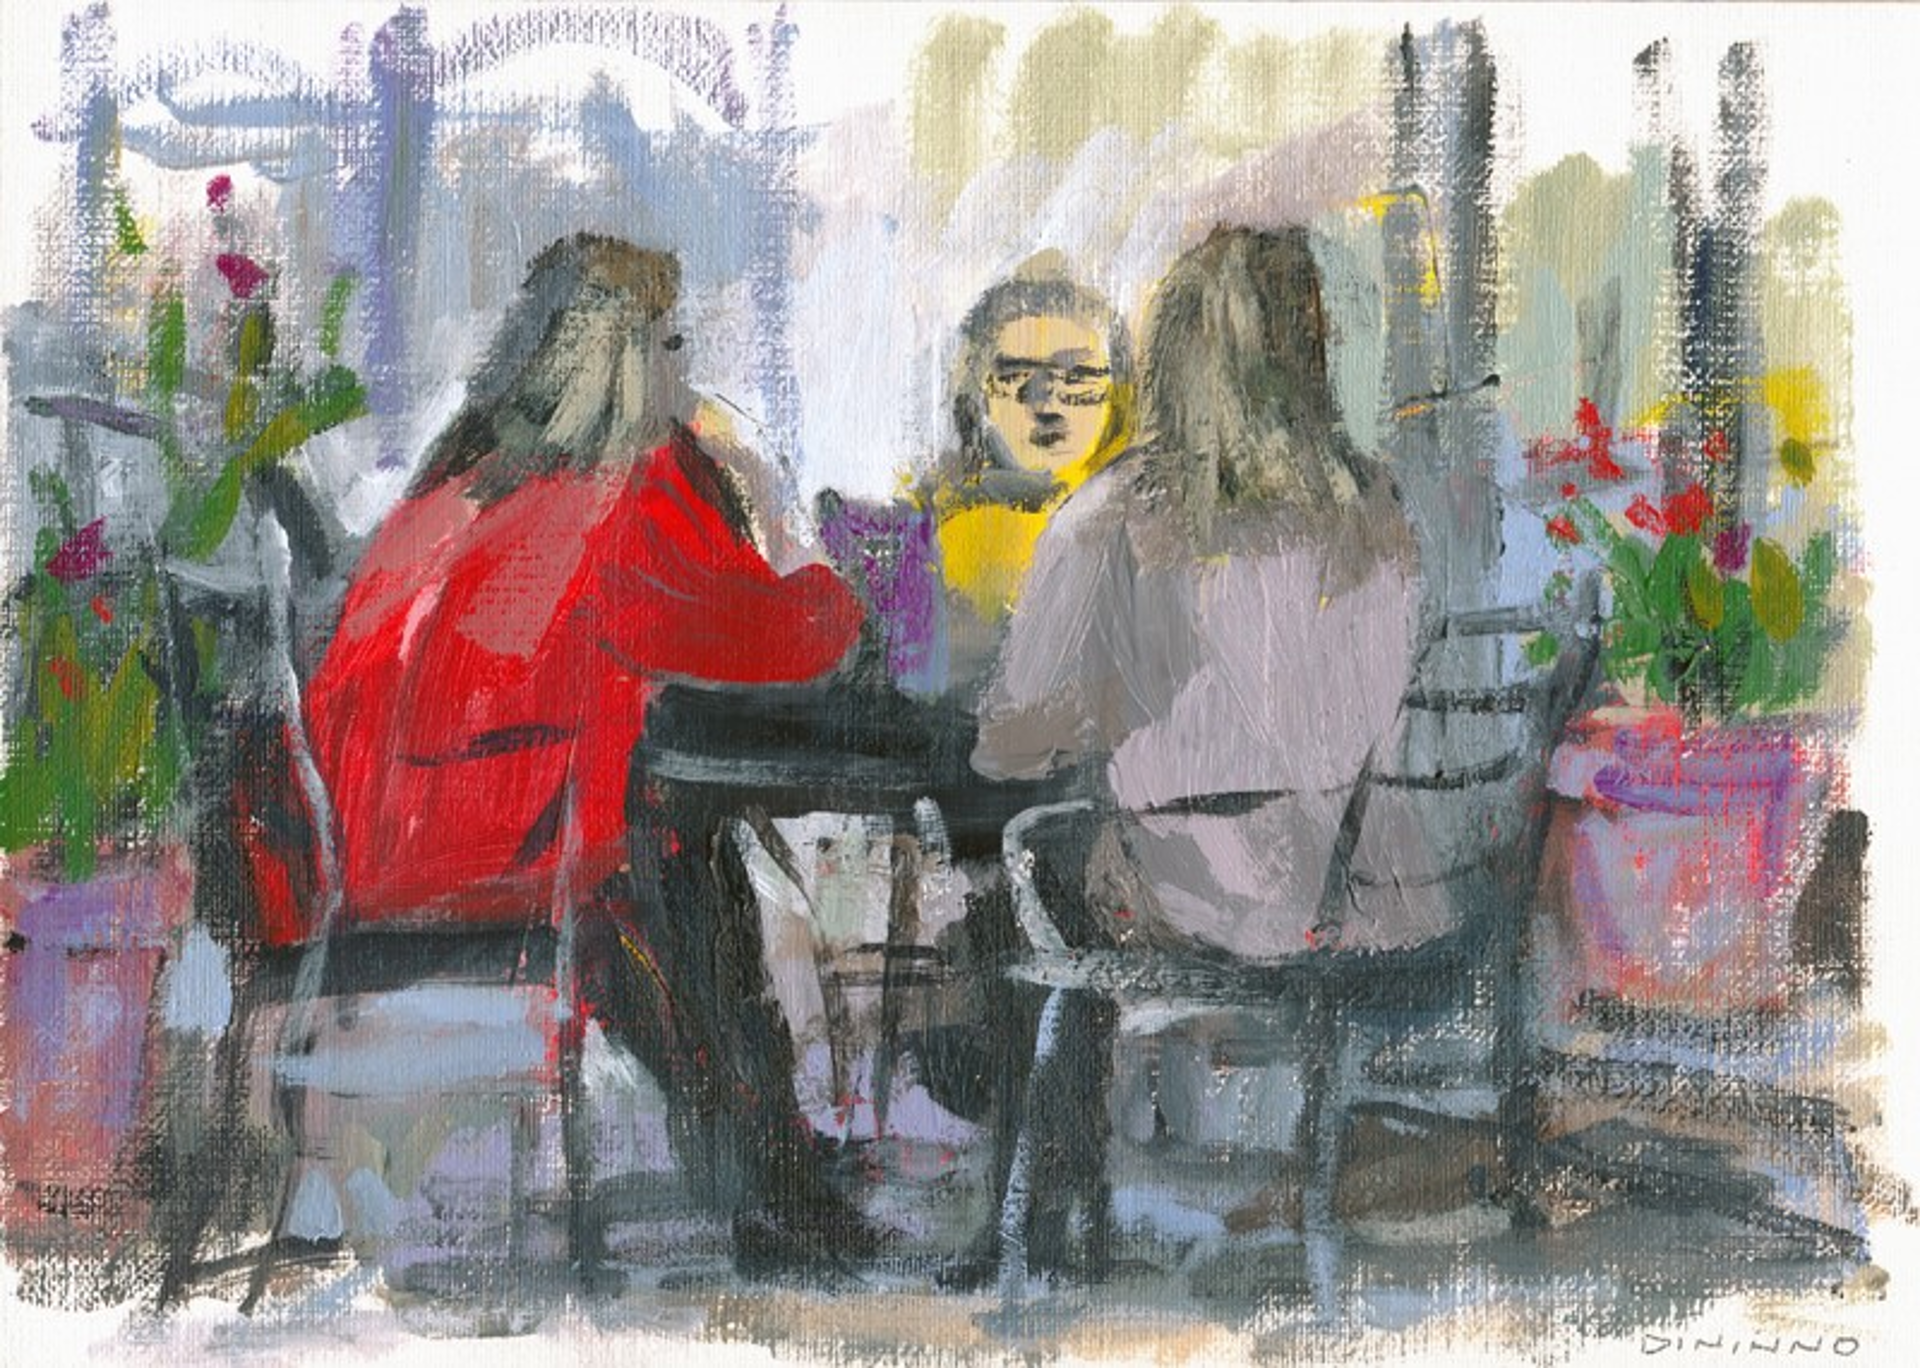 Ladies in a Cafe by Steve Dininno